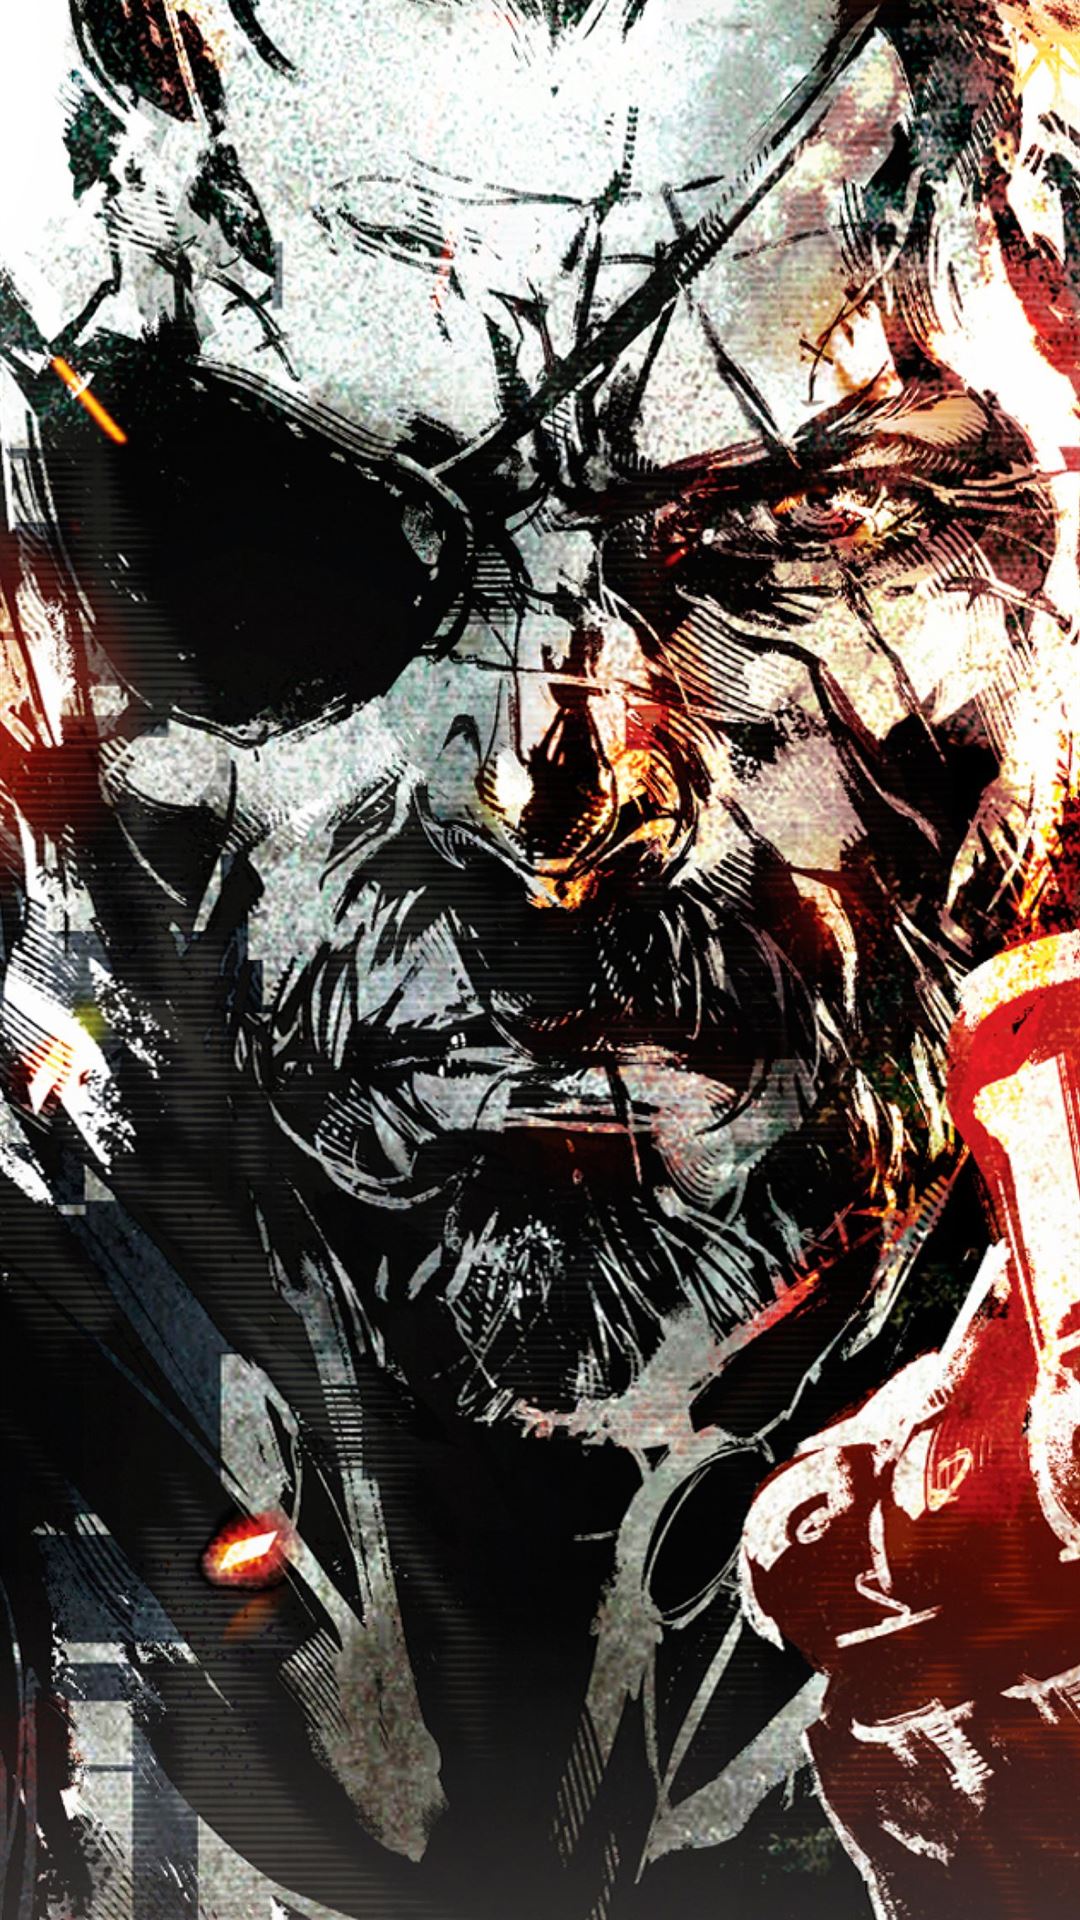 metal gear solid iPhone Wallpapers Free Download